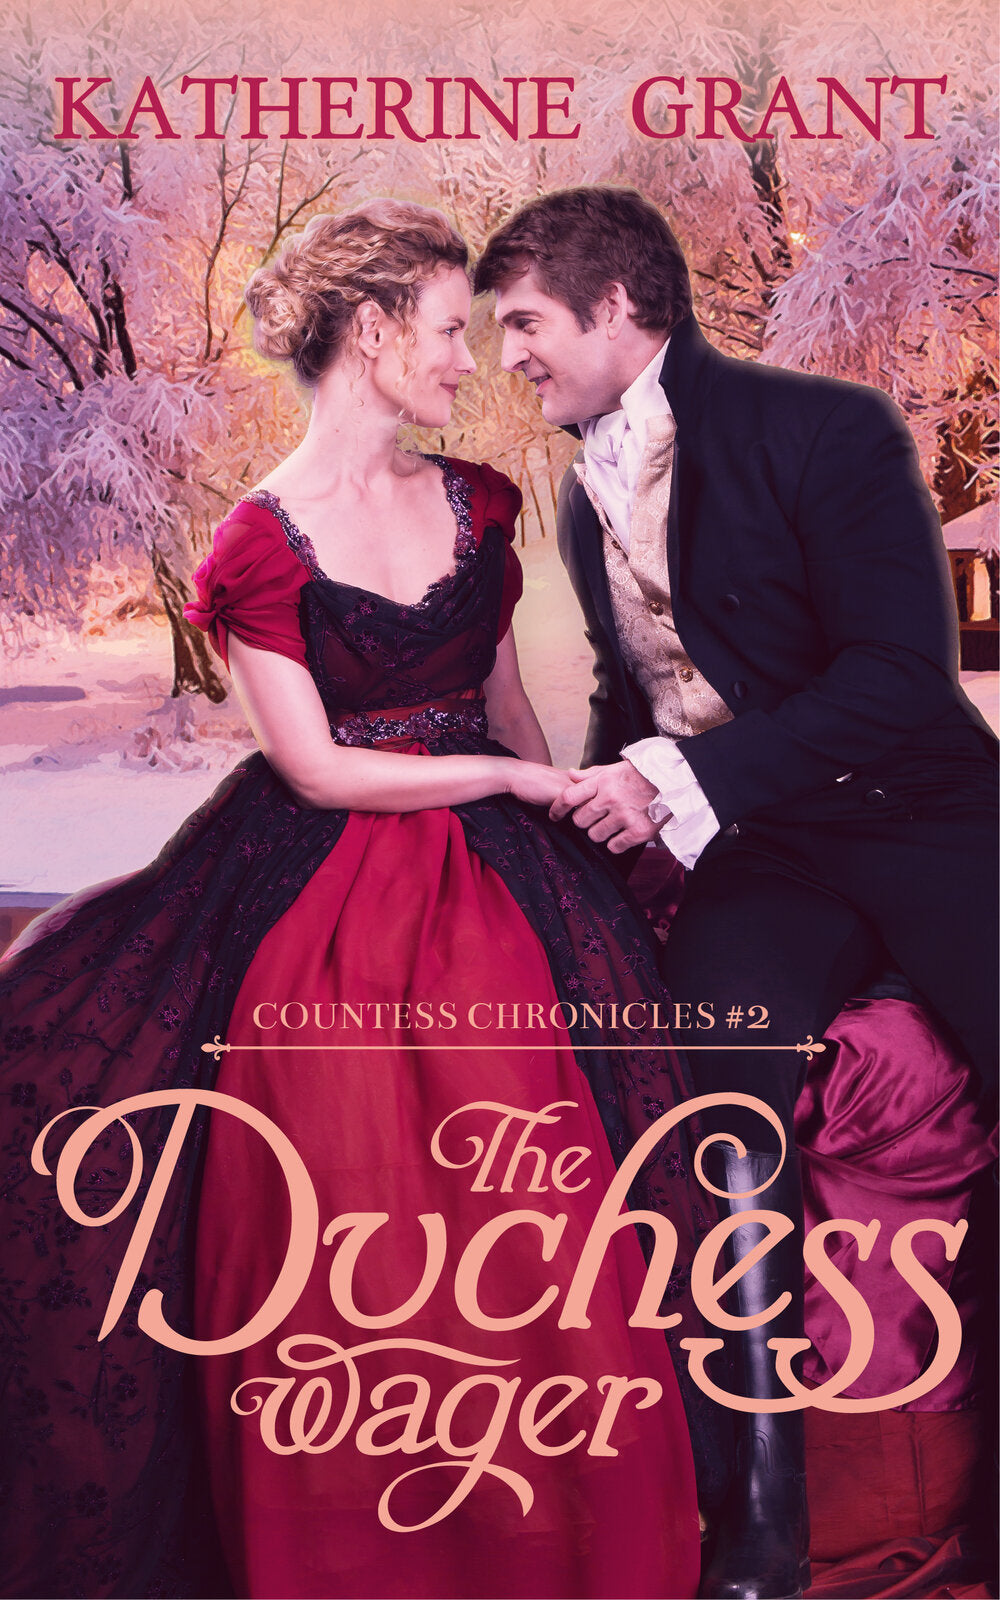 The Duchess Wager by Katherine Grant